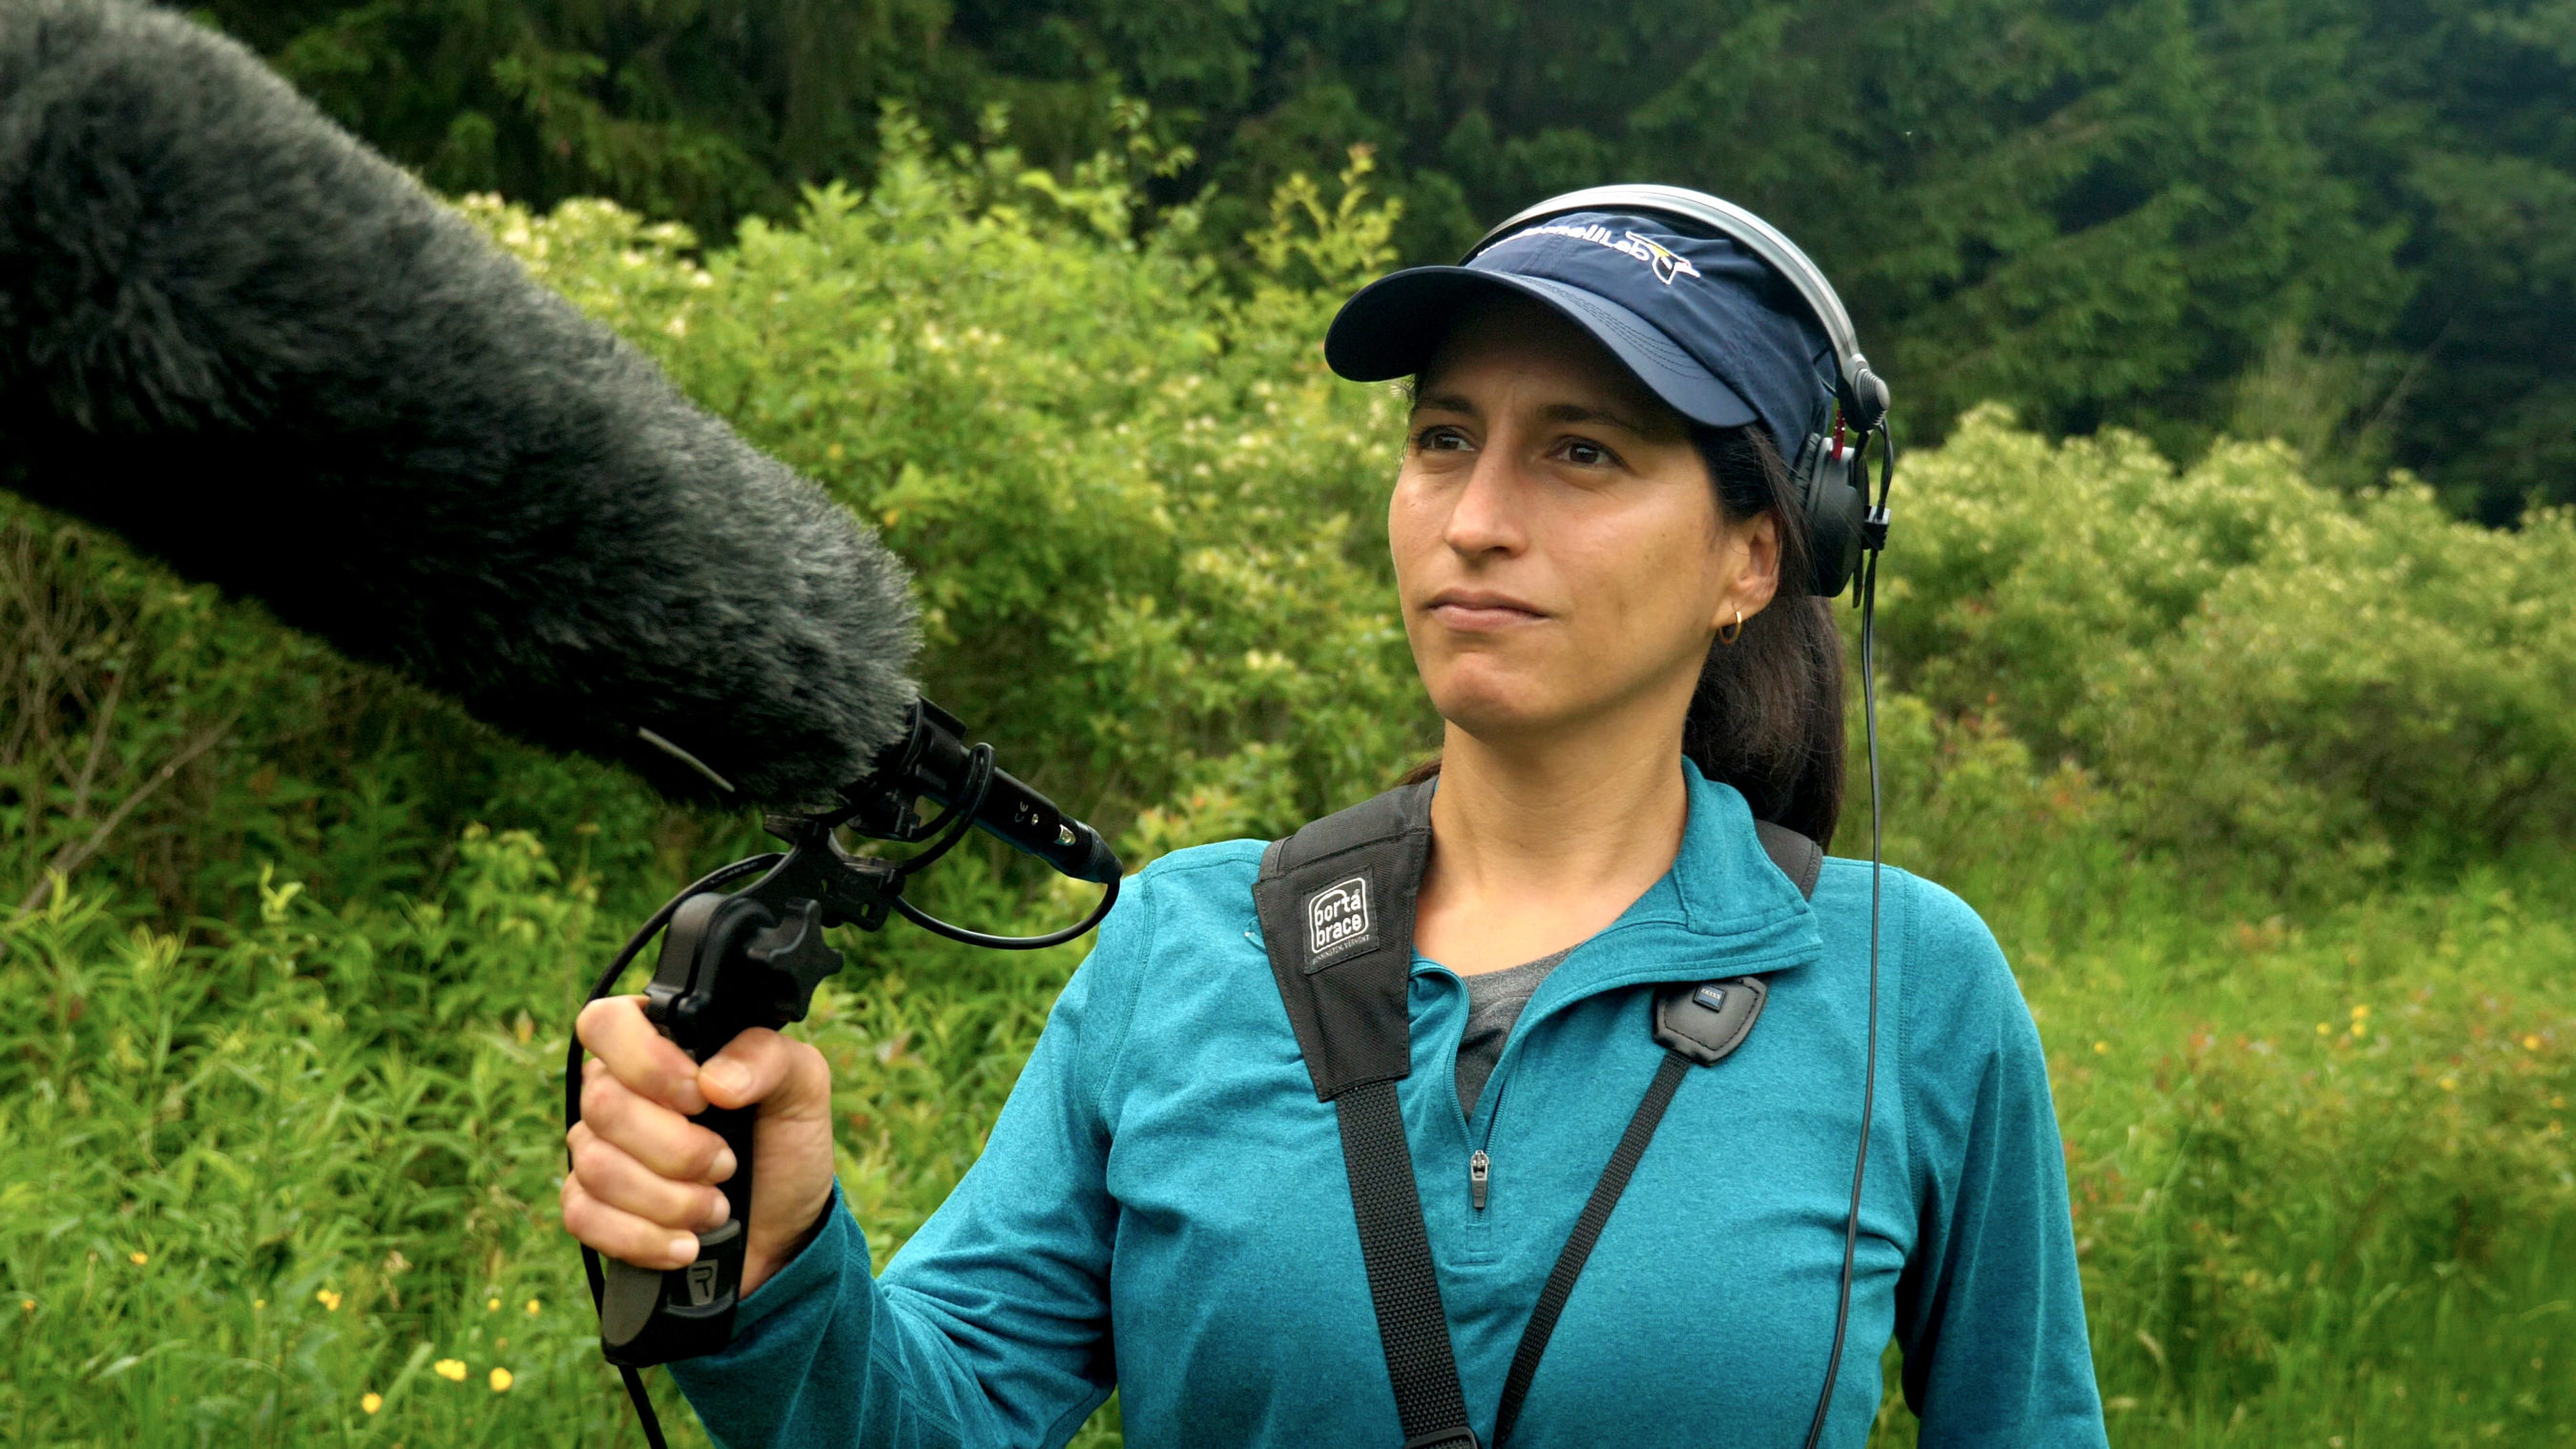 woman outdoors wearing headphones and holding a microphone